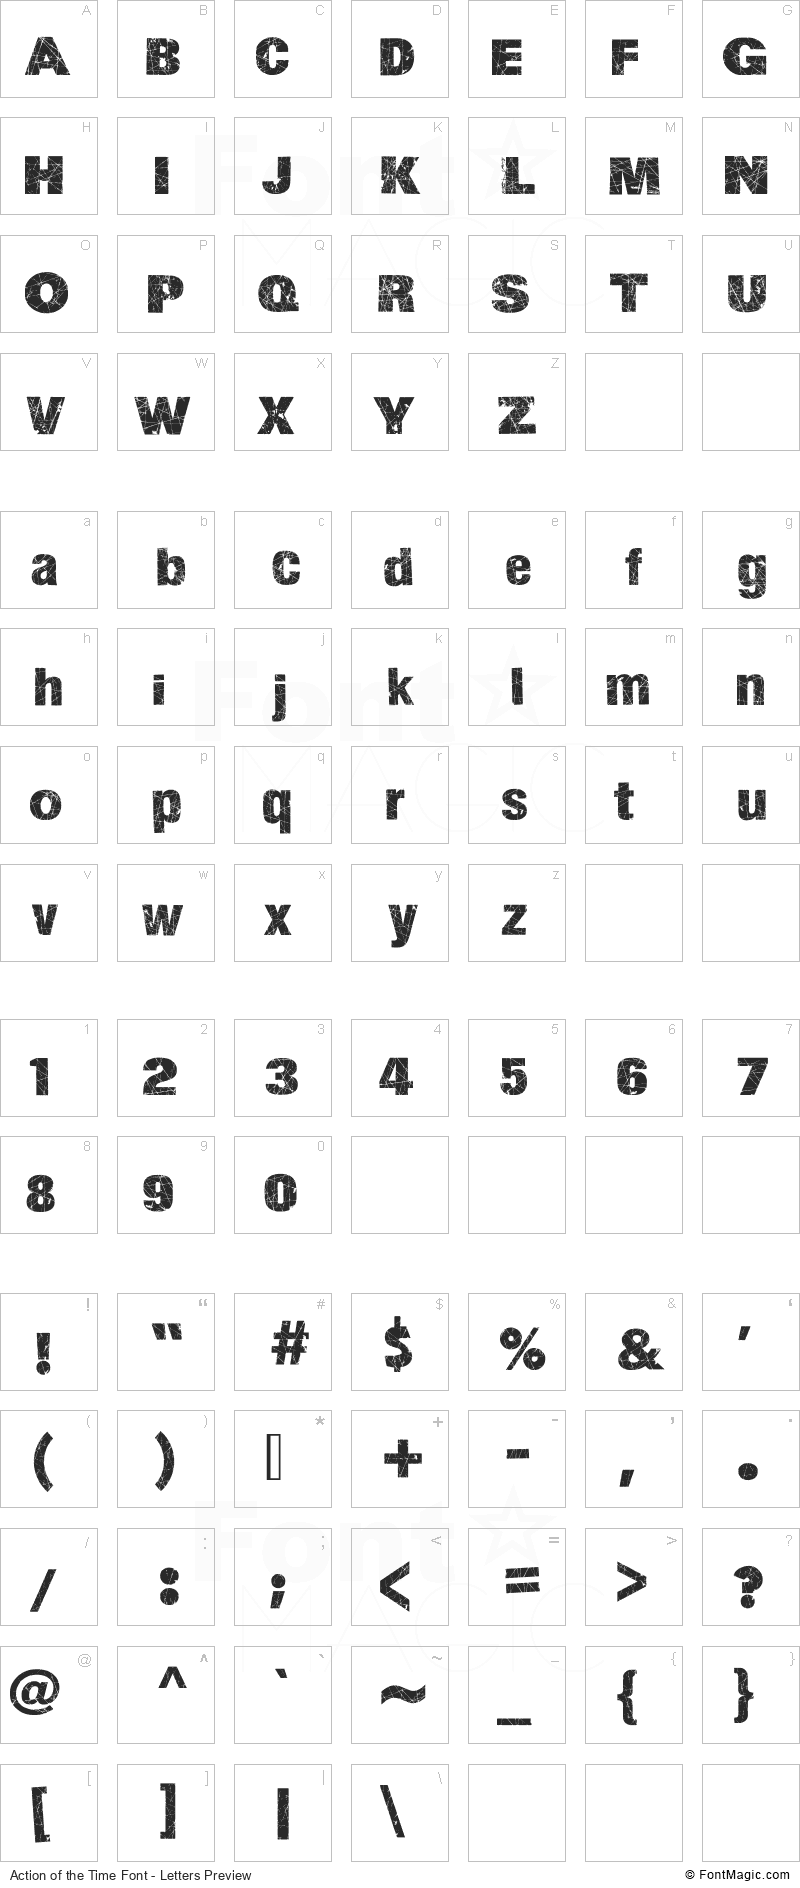 Action of the Time Font - All Latters Preview Chart